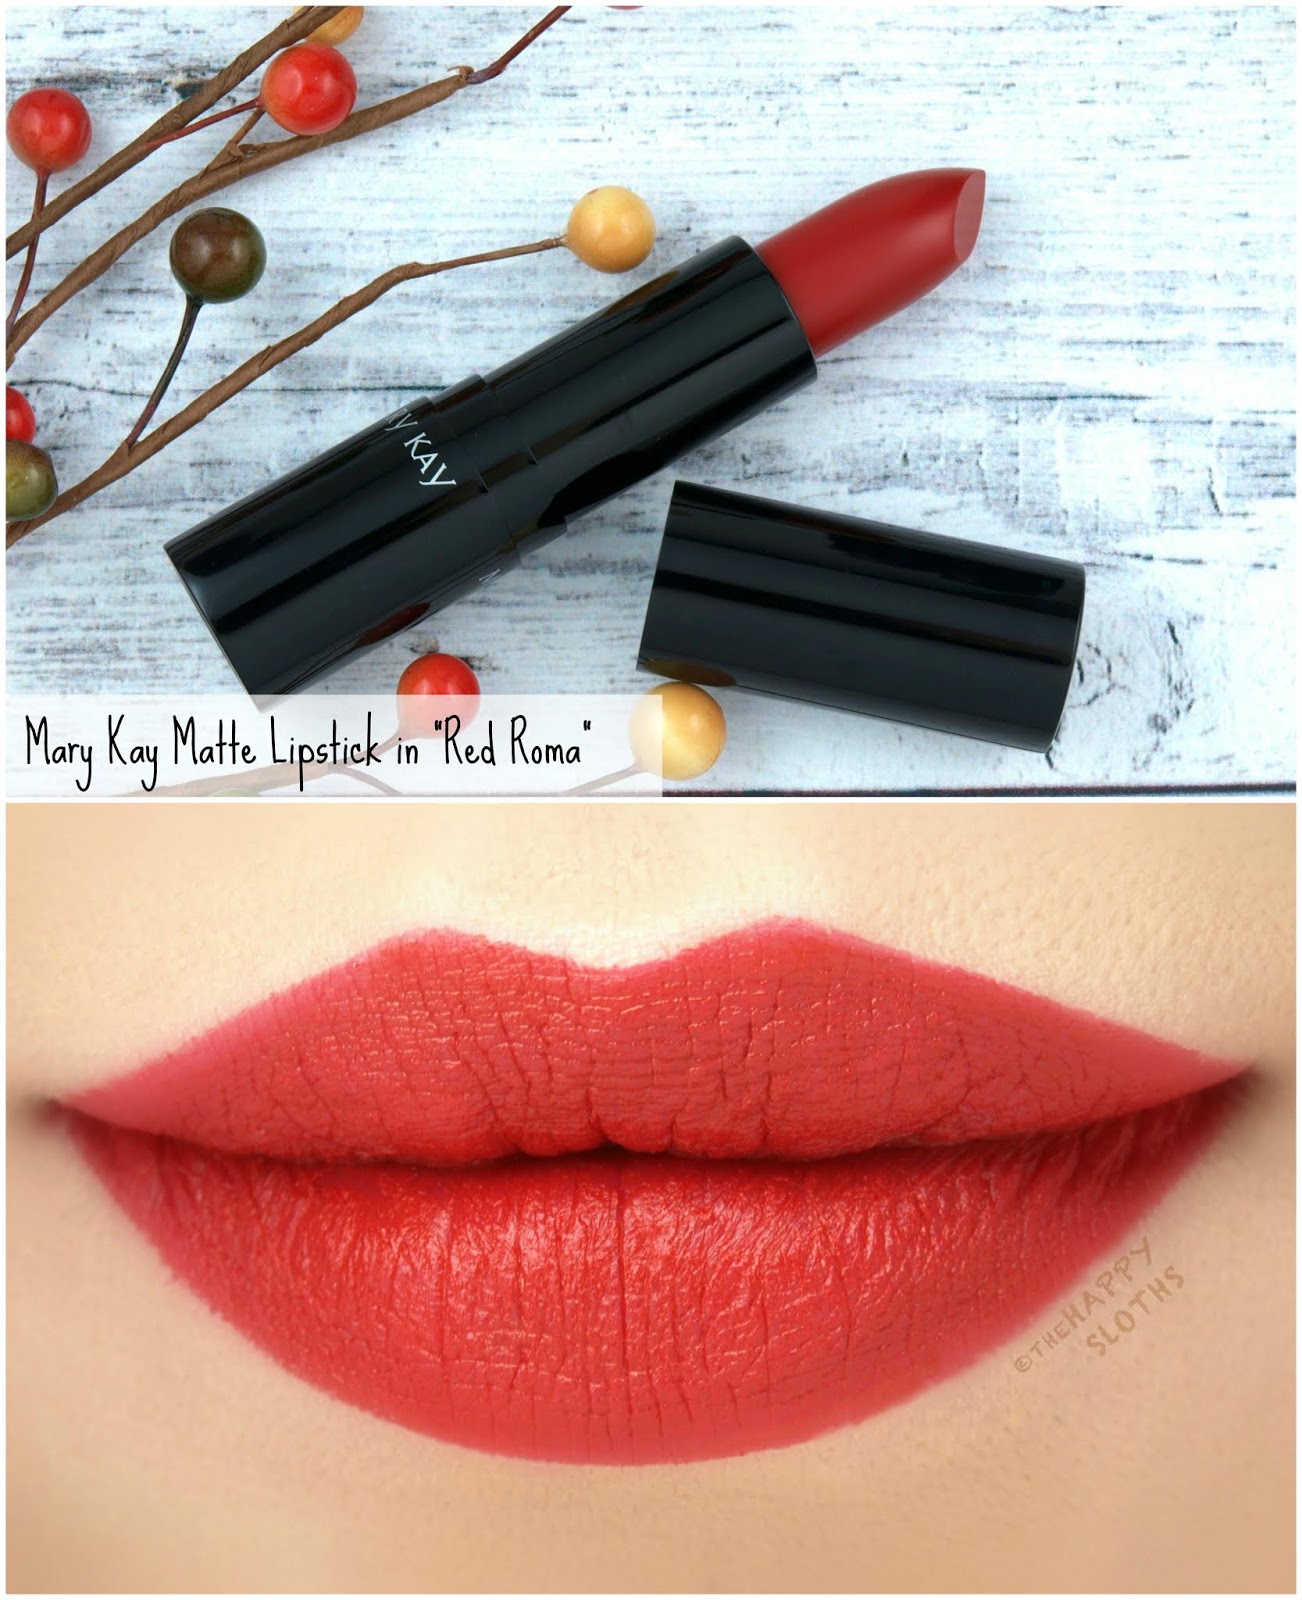 Mary Kay | Fall 2018 Matte Lipstick in "Red Roma": Review and Swatches